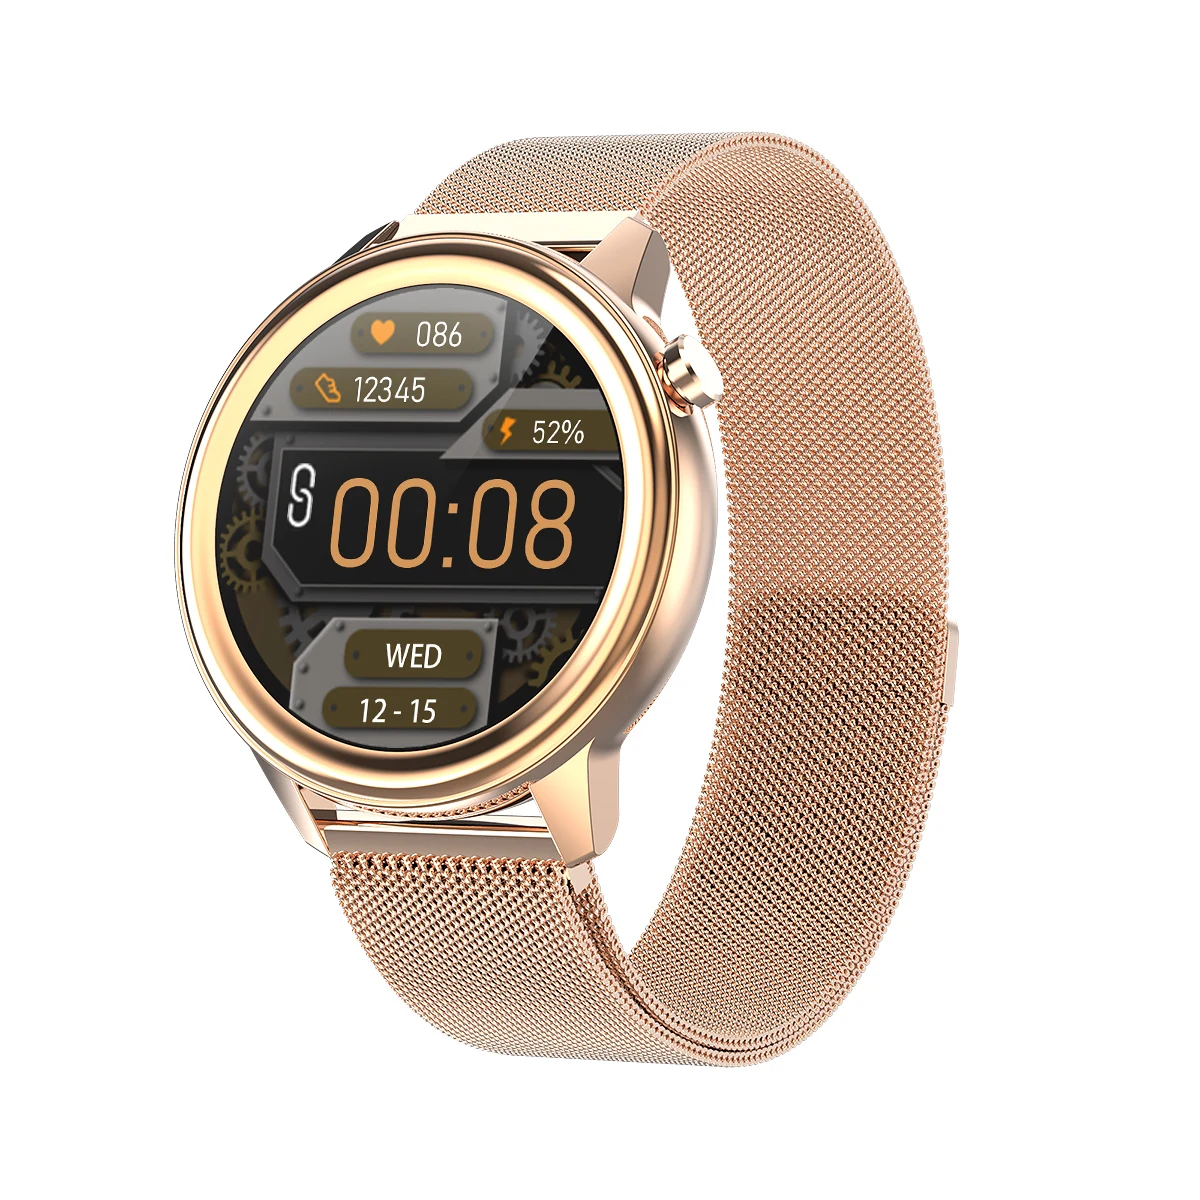 

2020 Waterproof IP68 1.3in dynamic UI temperature monitoring F81 smart watch with Heart rate monitor blood oxygen monitoring, Gold, blue